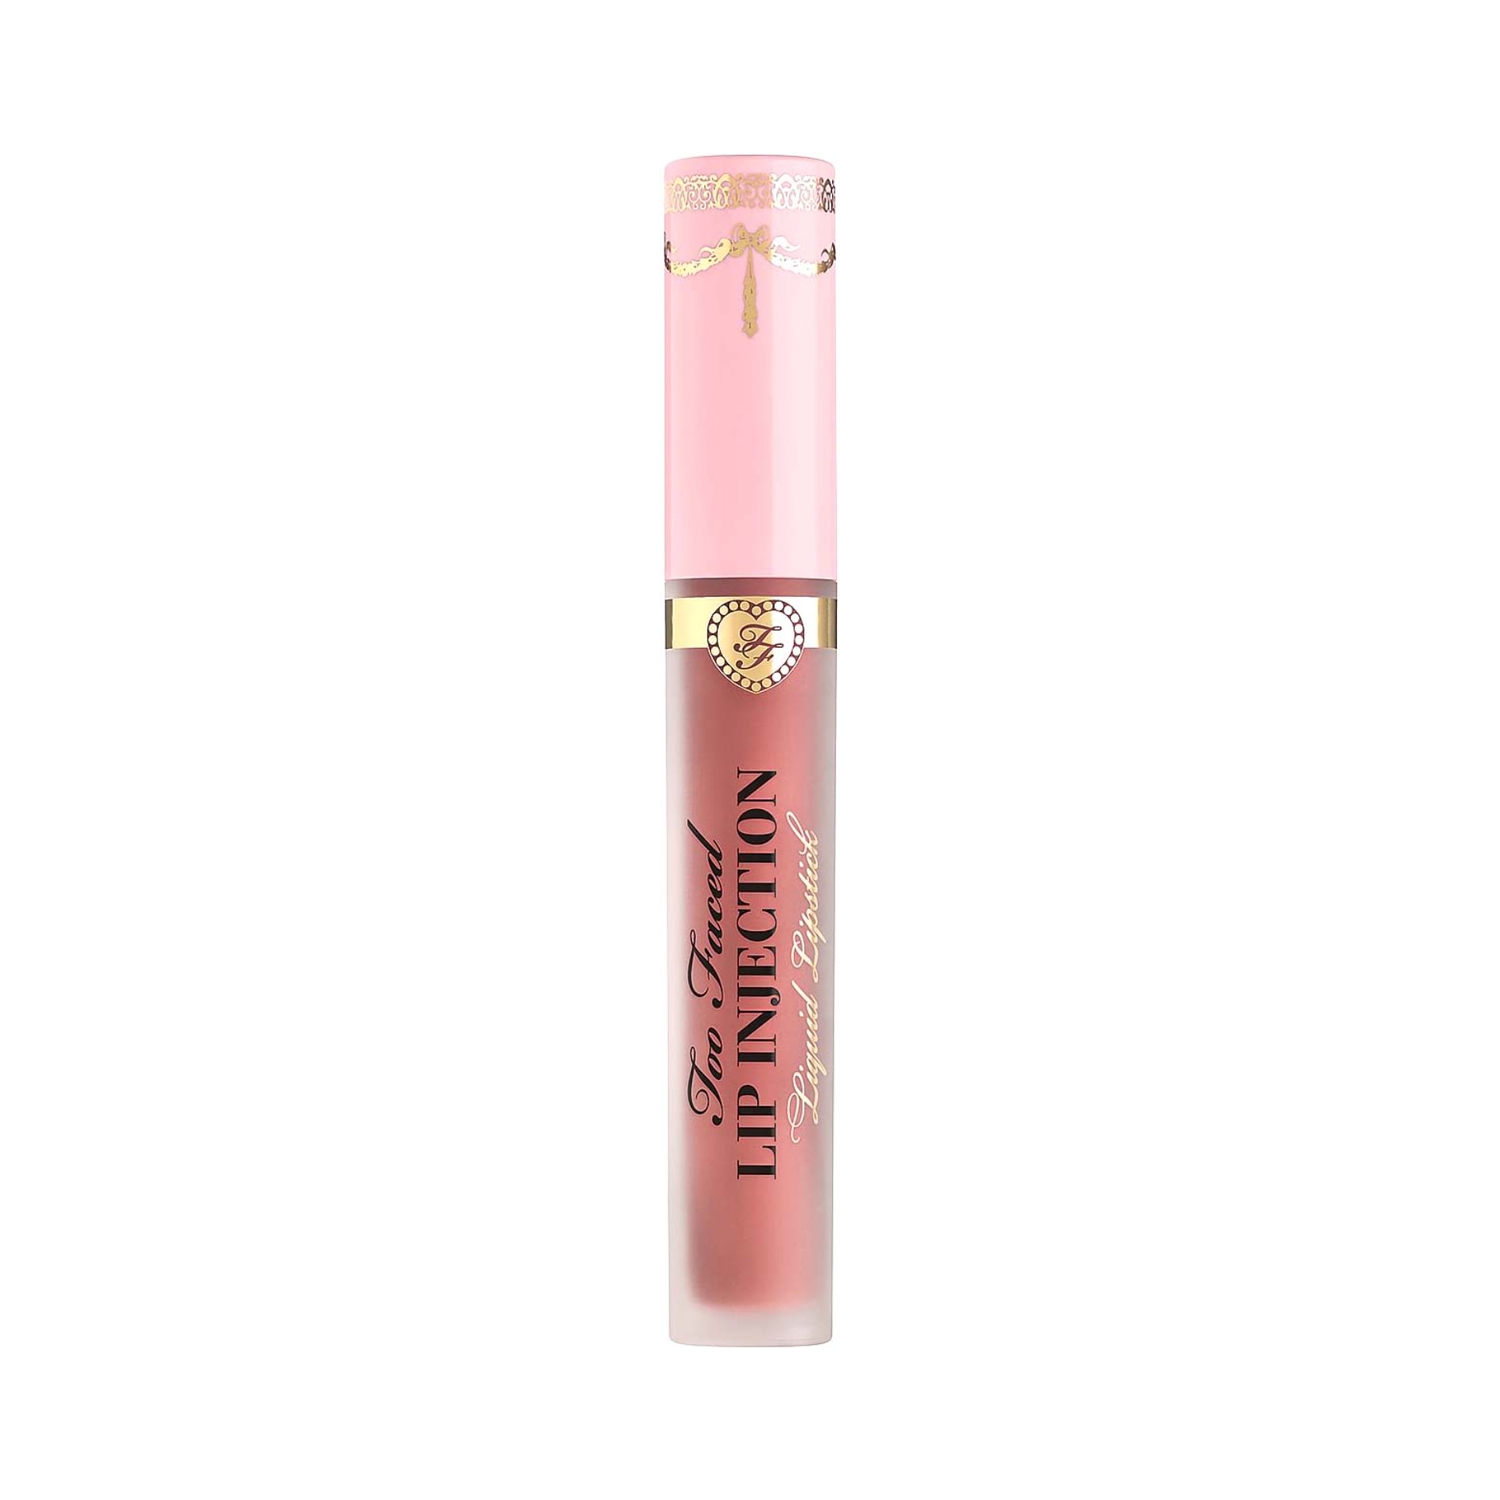 Too Faced | Too Faced Lip Injection Liquid Lipstick - Size Queen (3ml)